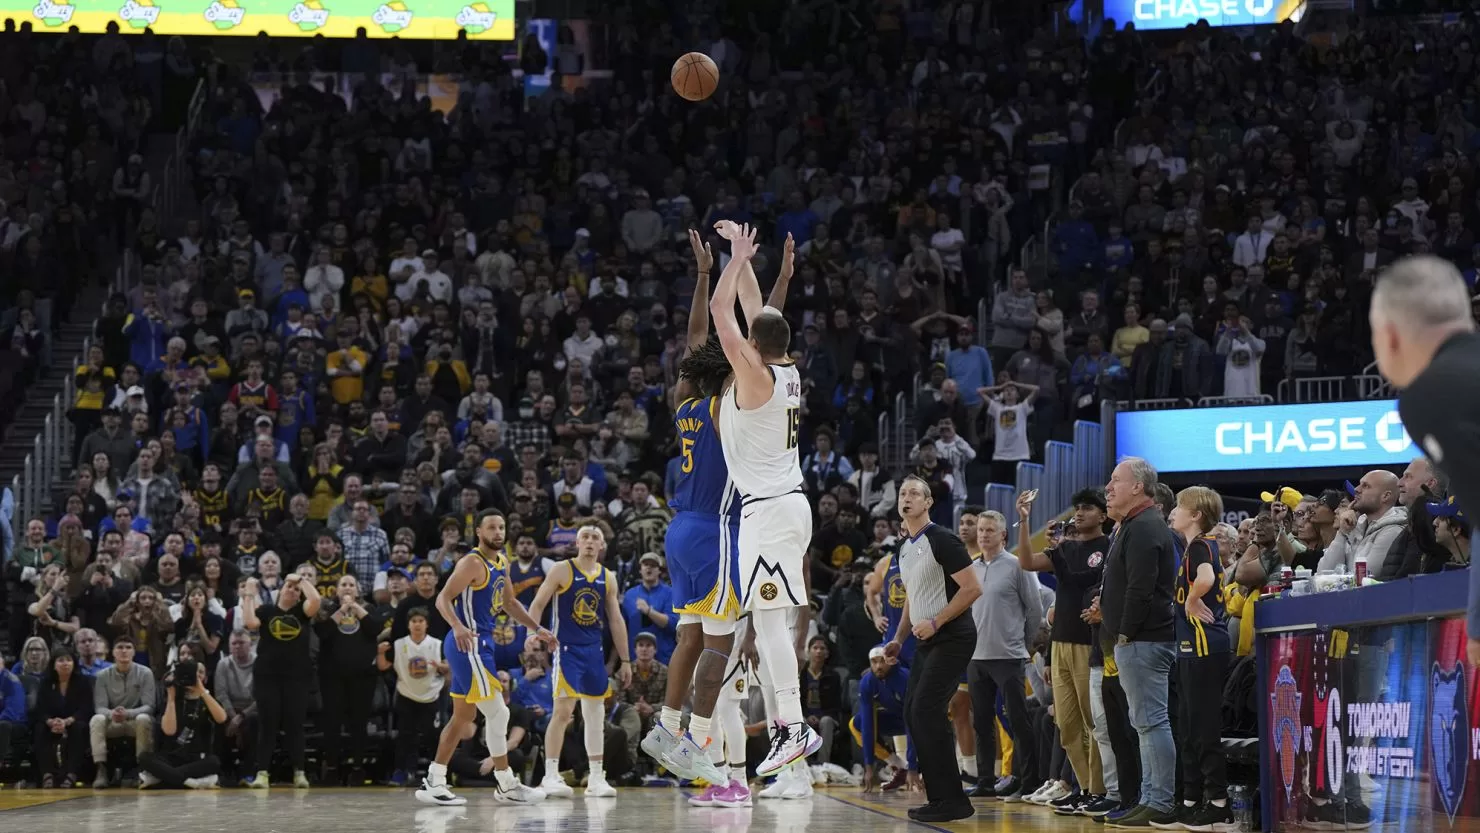 The game-winning shot was made by Nikola Jokic from almost half court